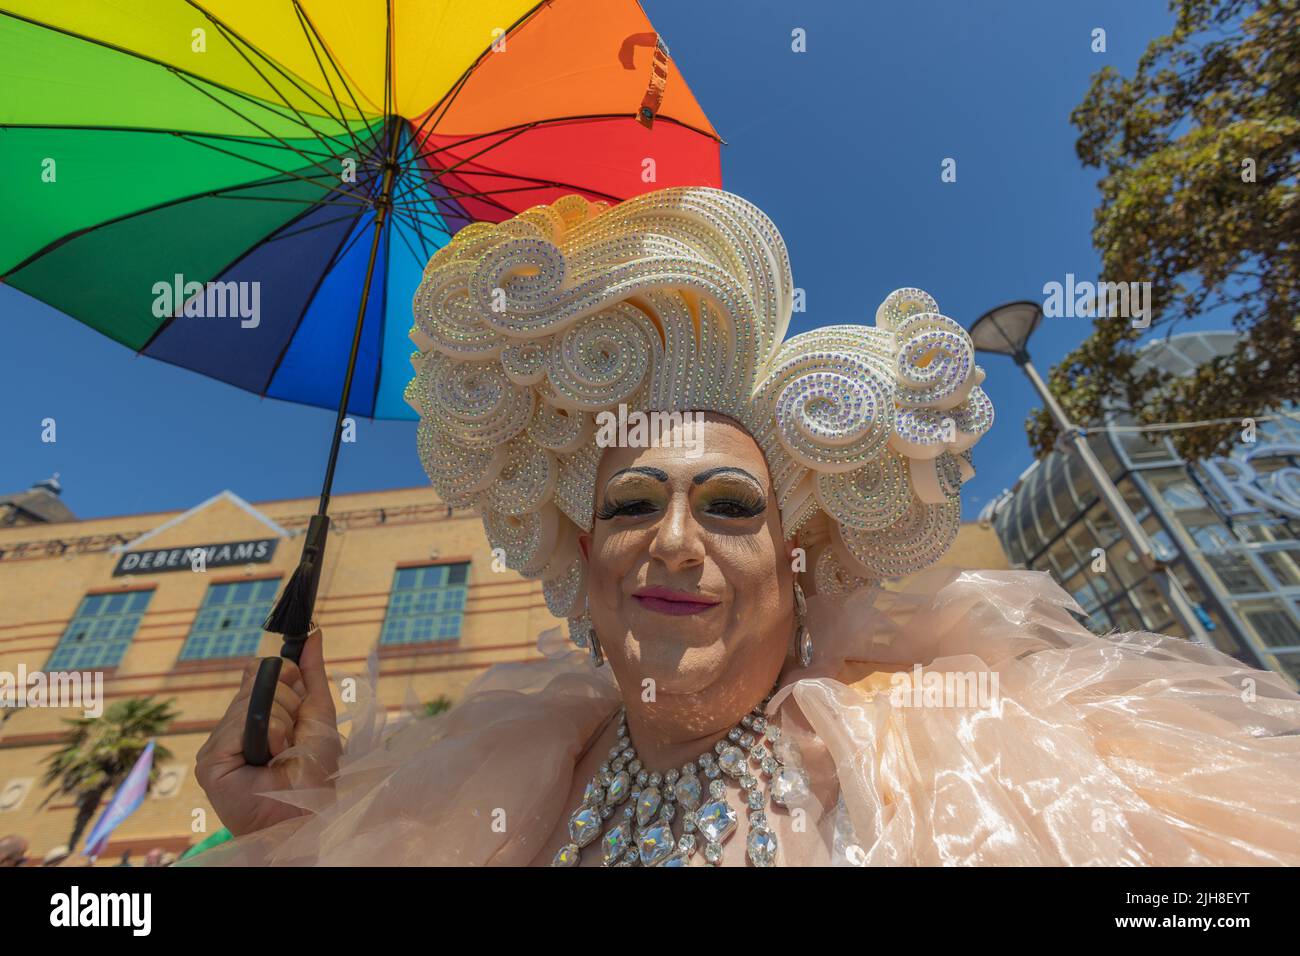 Southend on Sea, UK. 16th July, 2022. 1000s of participants gather for Southend Pride event, before the parade sets off along the High Street and into Warrior Square Gardens for a Pride Festival featuring live entertainment. Penelope Barritt/Alamy Live News Stock Photo